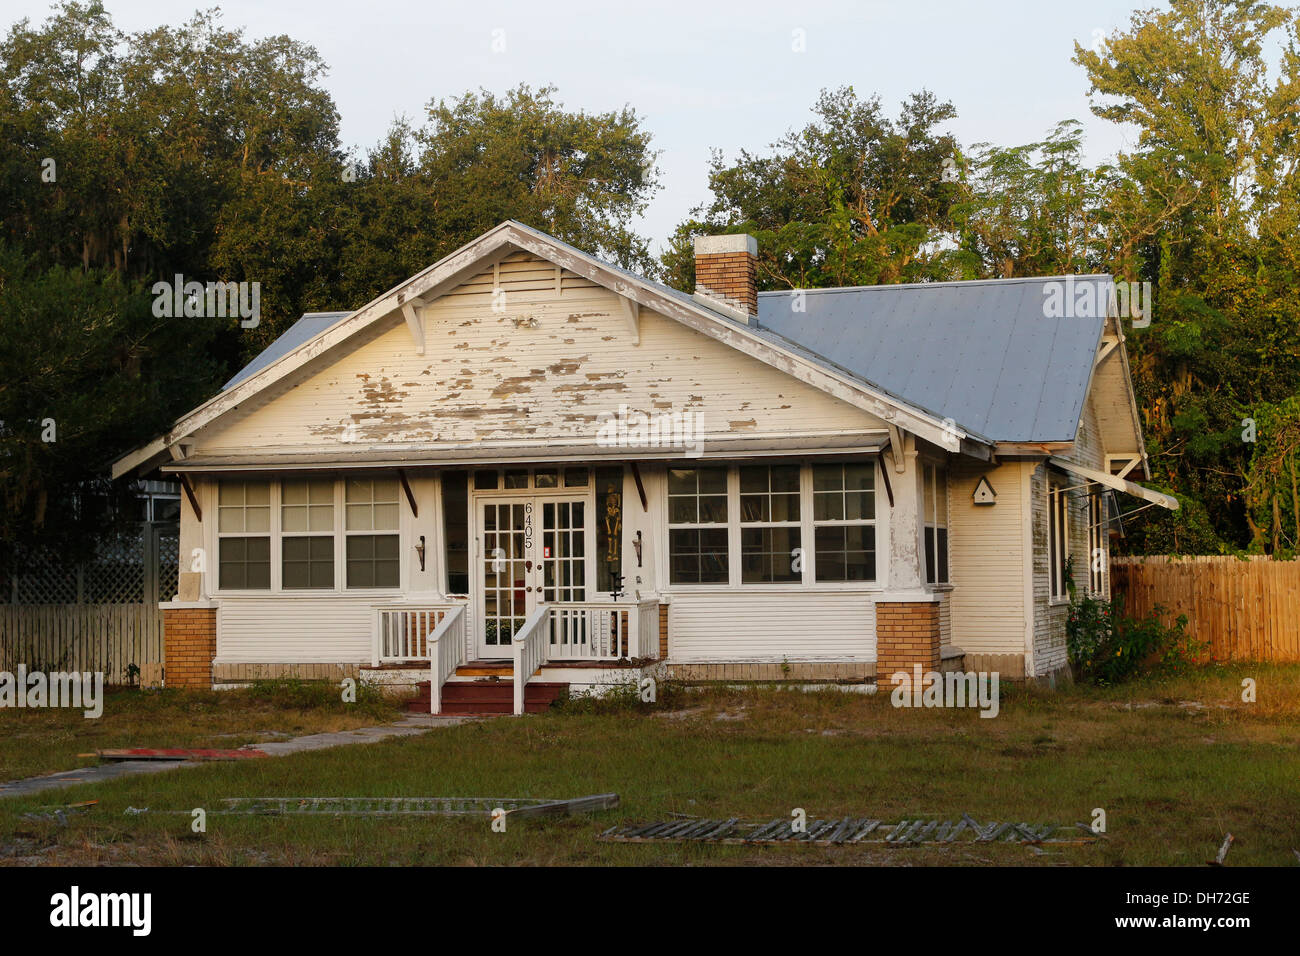 November 2013 - older single storey villa home in need of care and decoration  Loughman, Davenport, Florida. Stock Photo